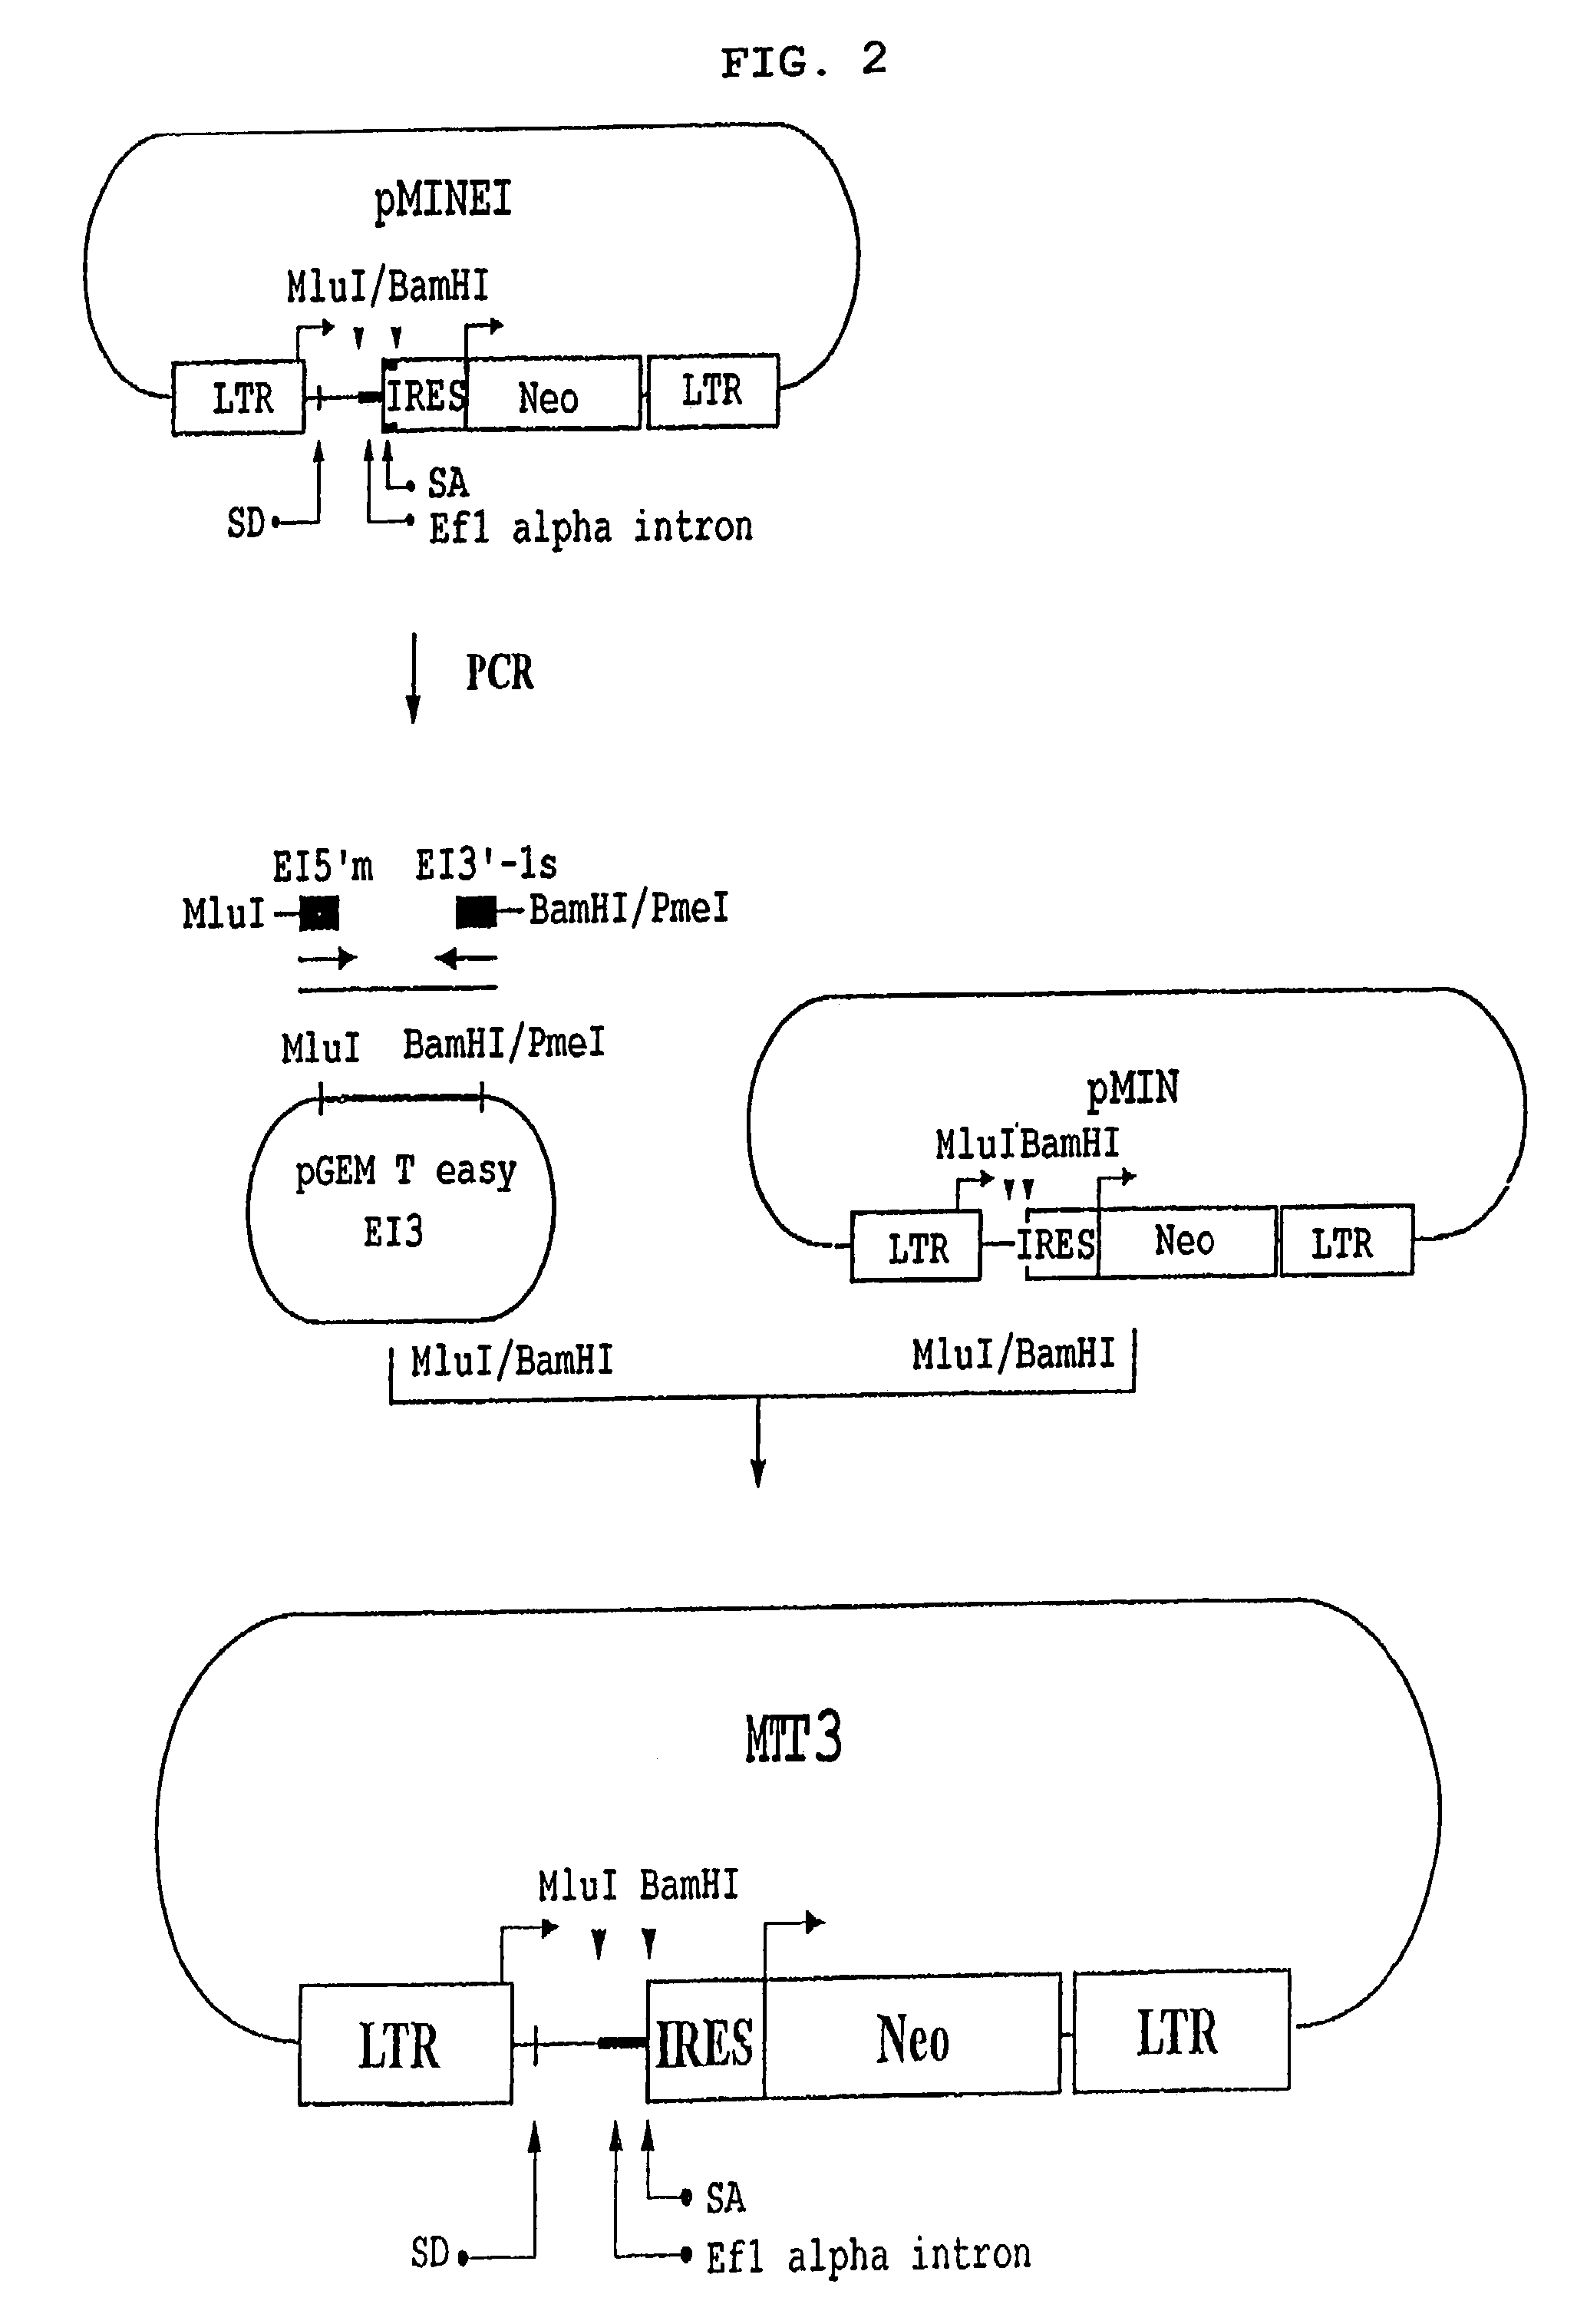 High efficiency retroviral vector which contains genetically engineered cellular non-coding sequence harboring splicing acceptor